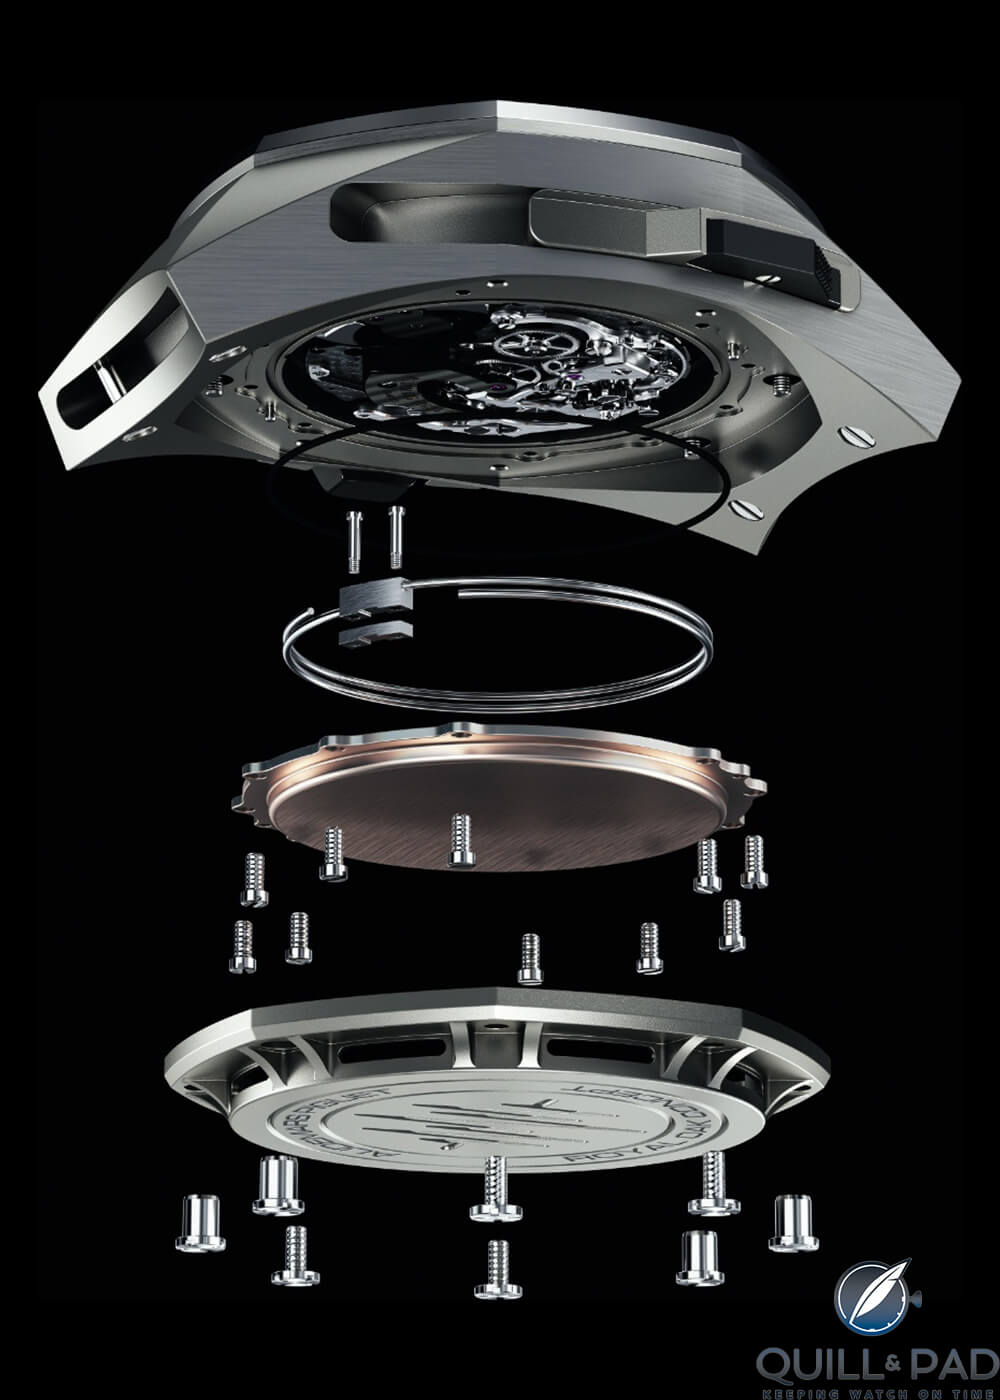 This exploded view shows the movement in the case at the top, followed by the gongs, then soundboard (shown as copper disk here) and the caseback at the bottom, Audemars Piguet Royal Oak Concept Supersonnerie